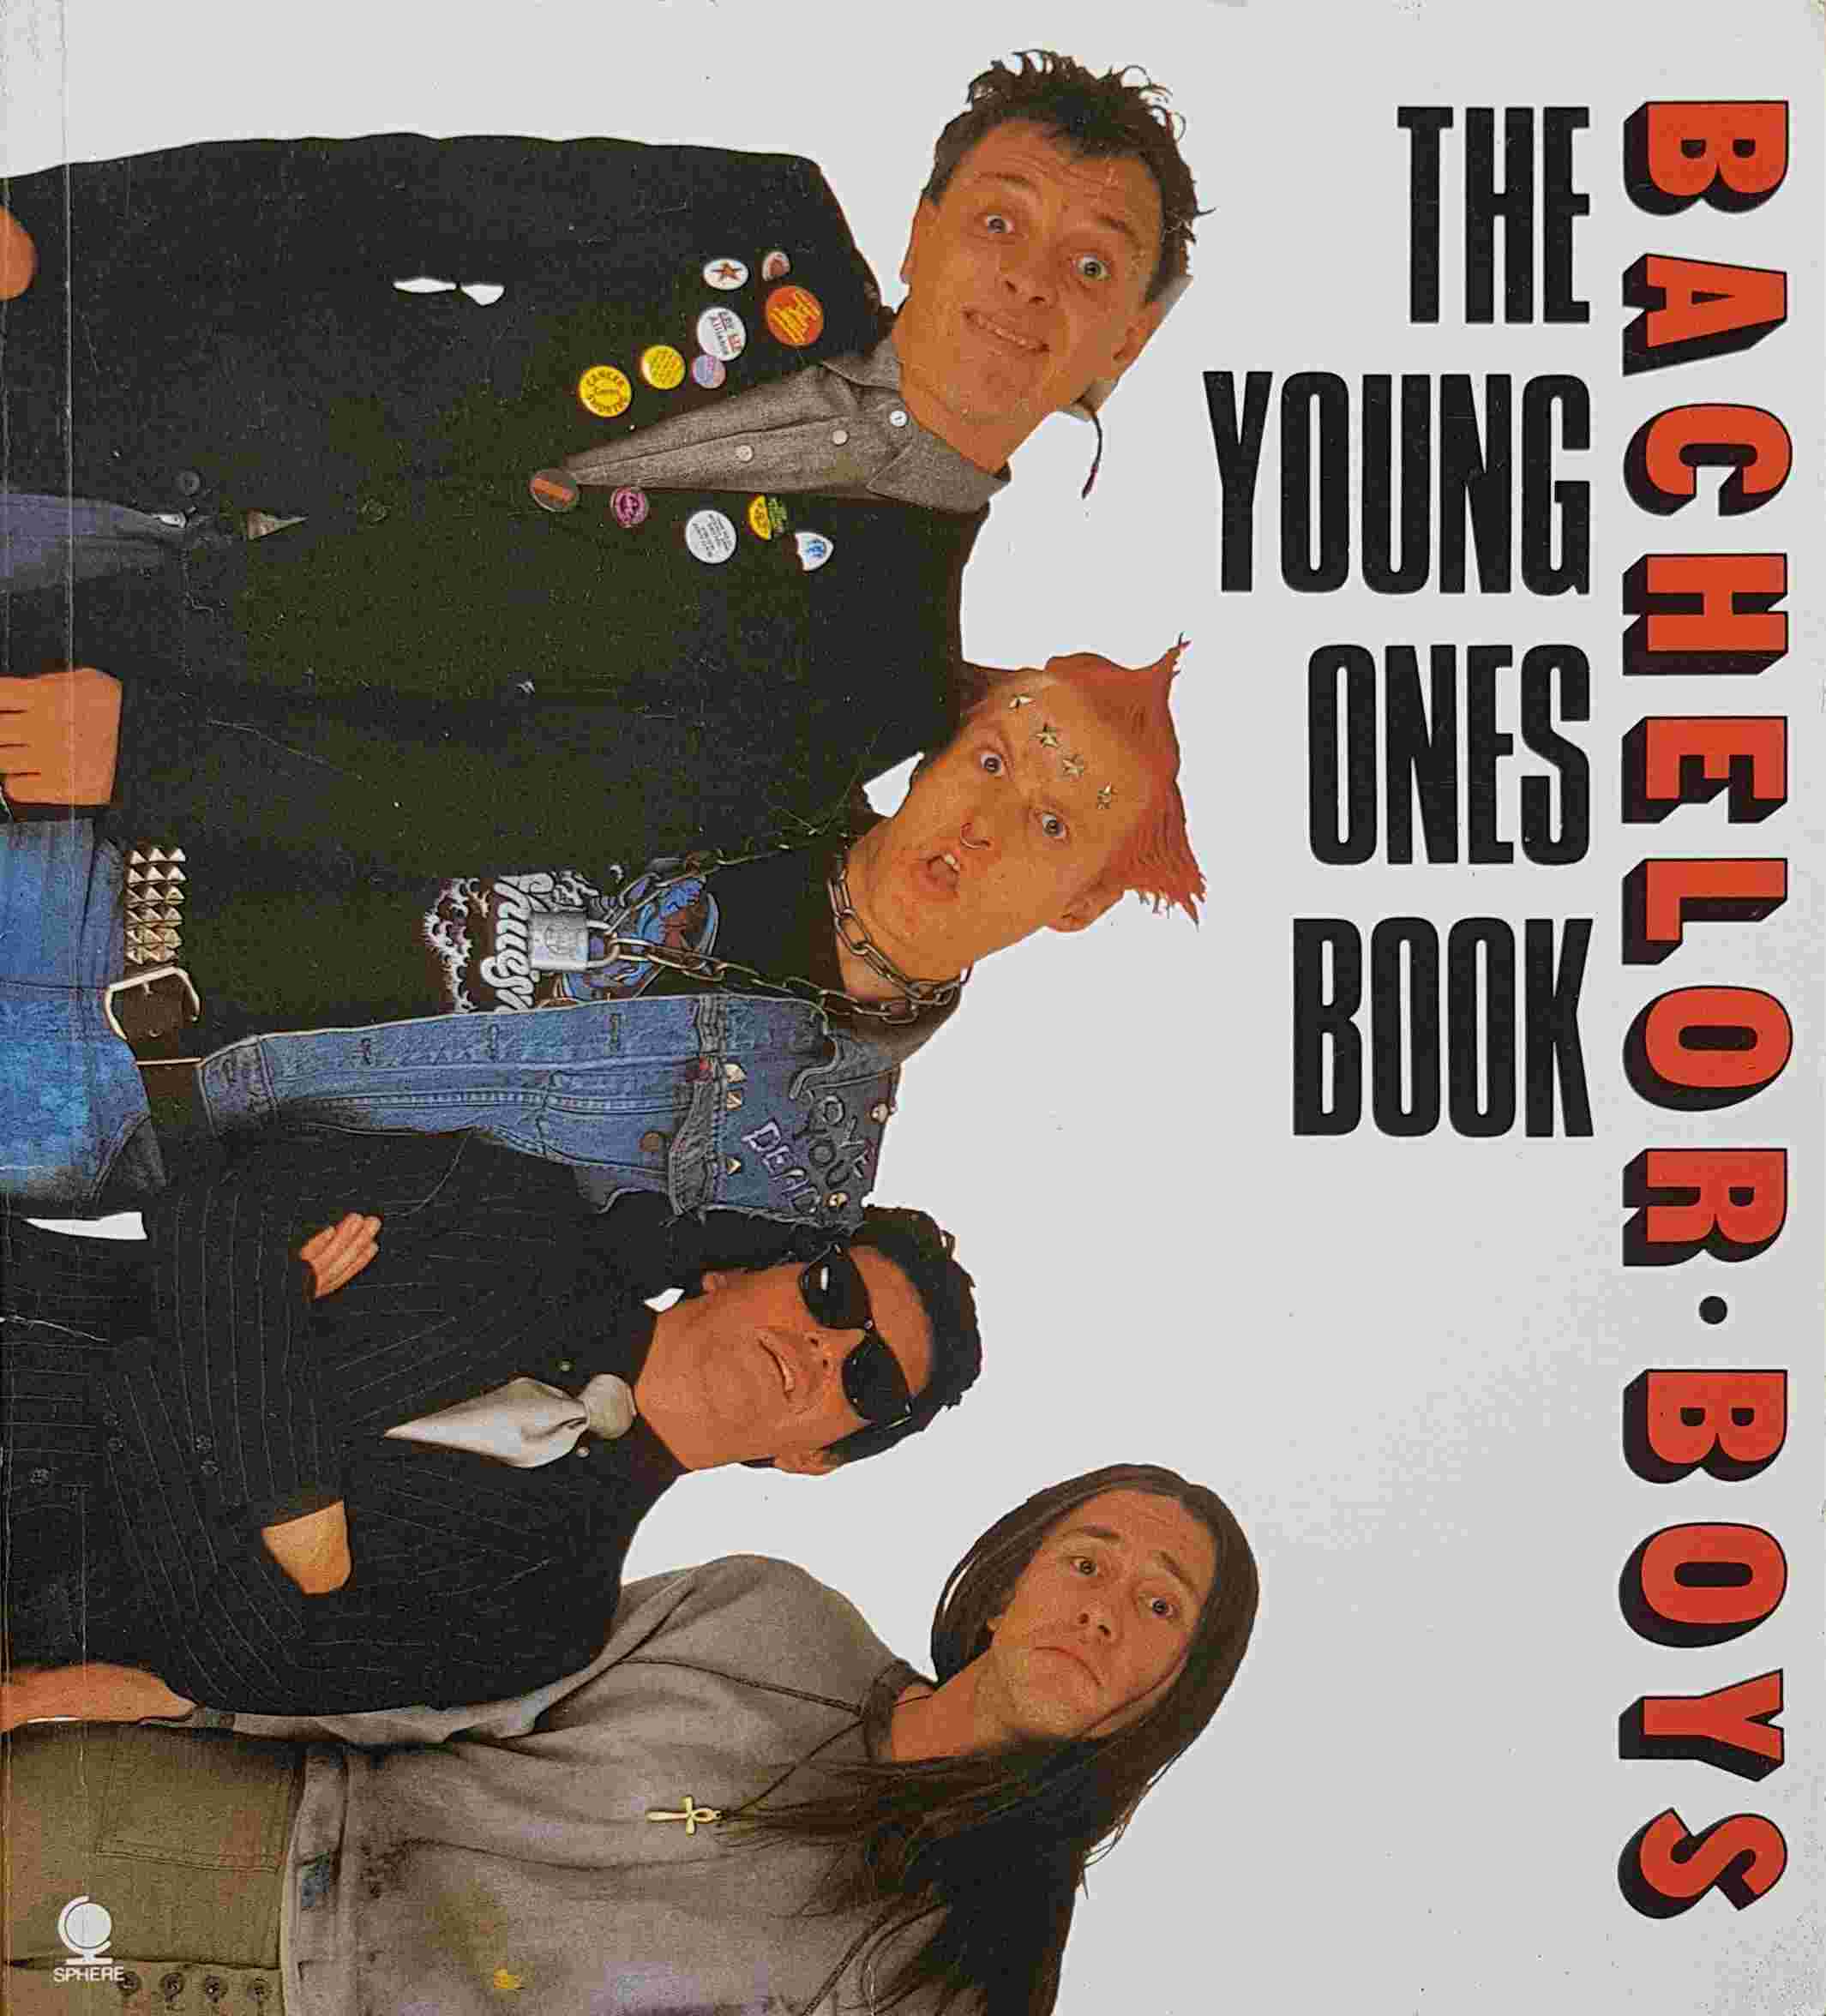 Picture of The young ones - Bachelor boys by artist Ben Elton / Rik Mayall from the BBC books - Records and Tapes library